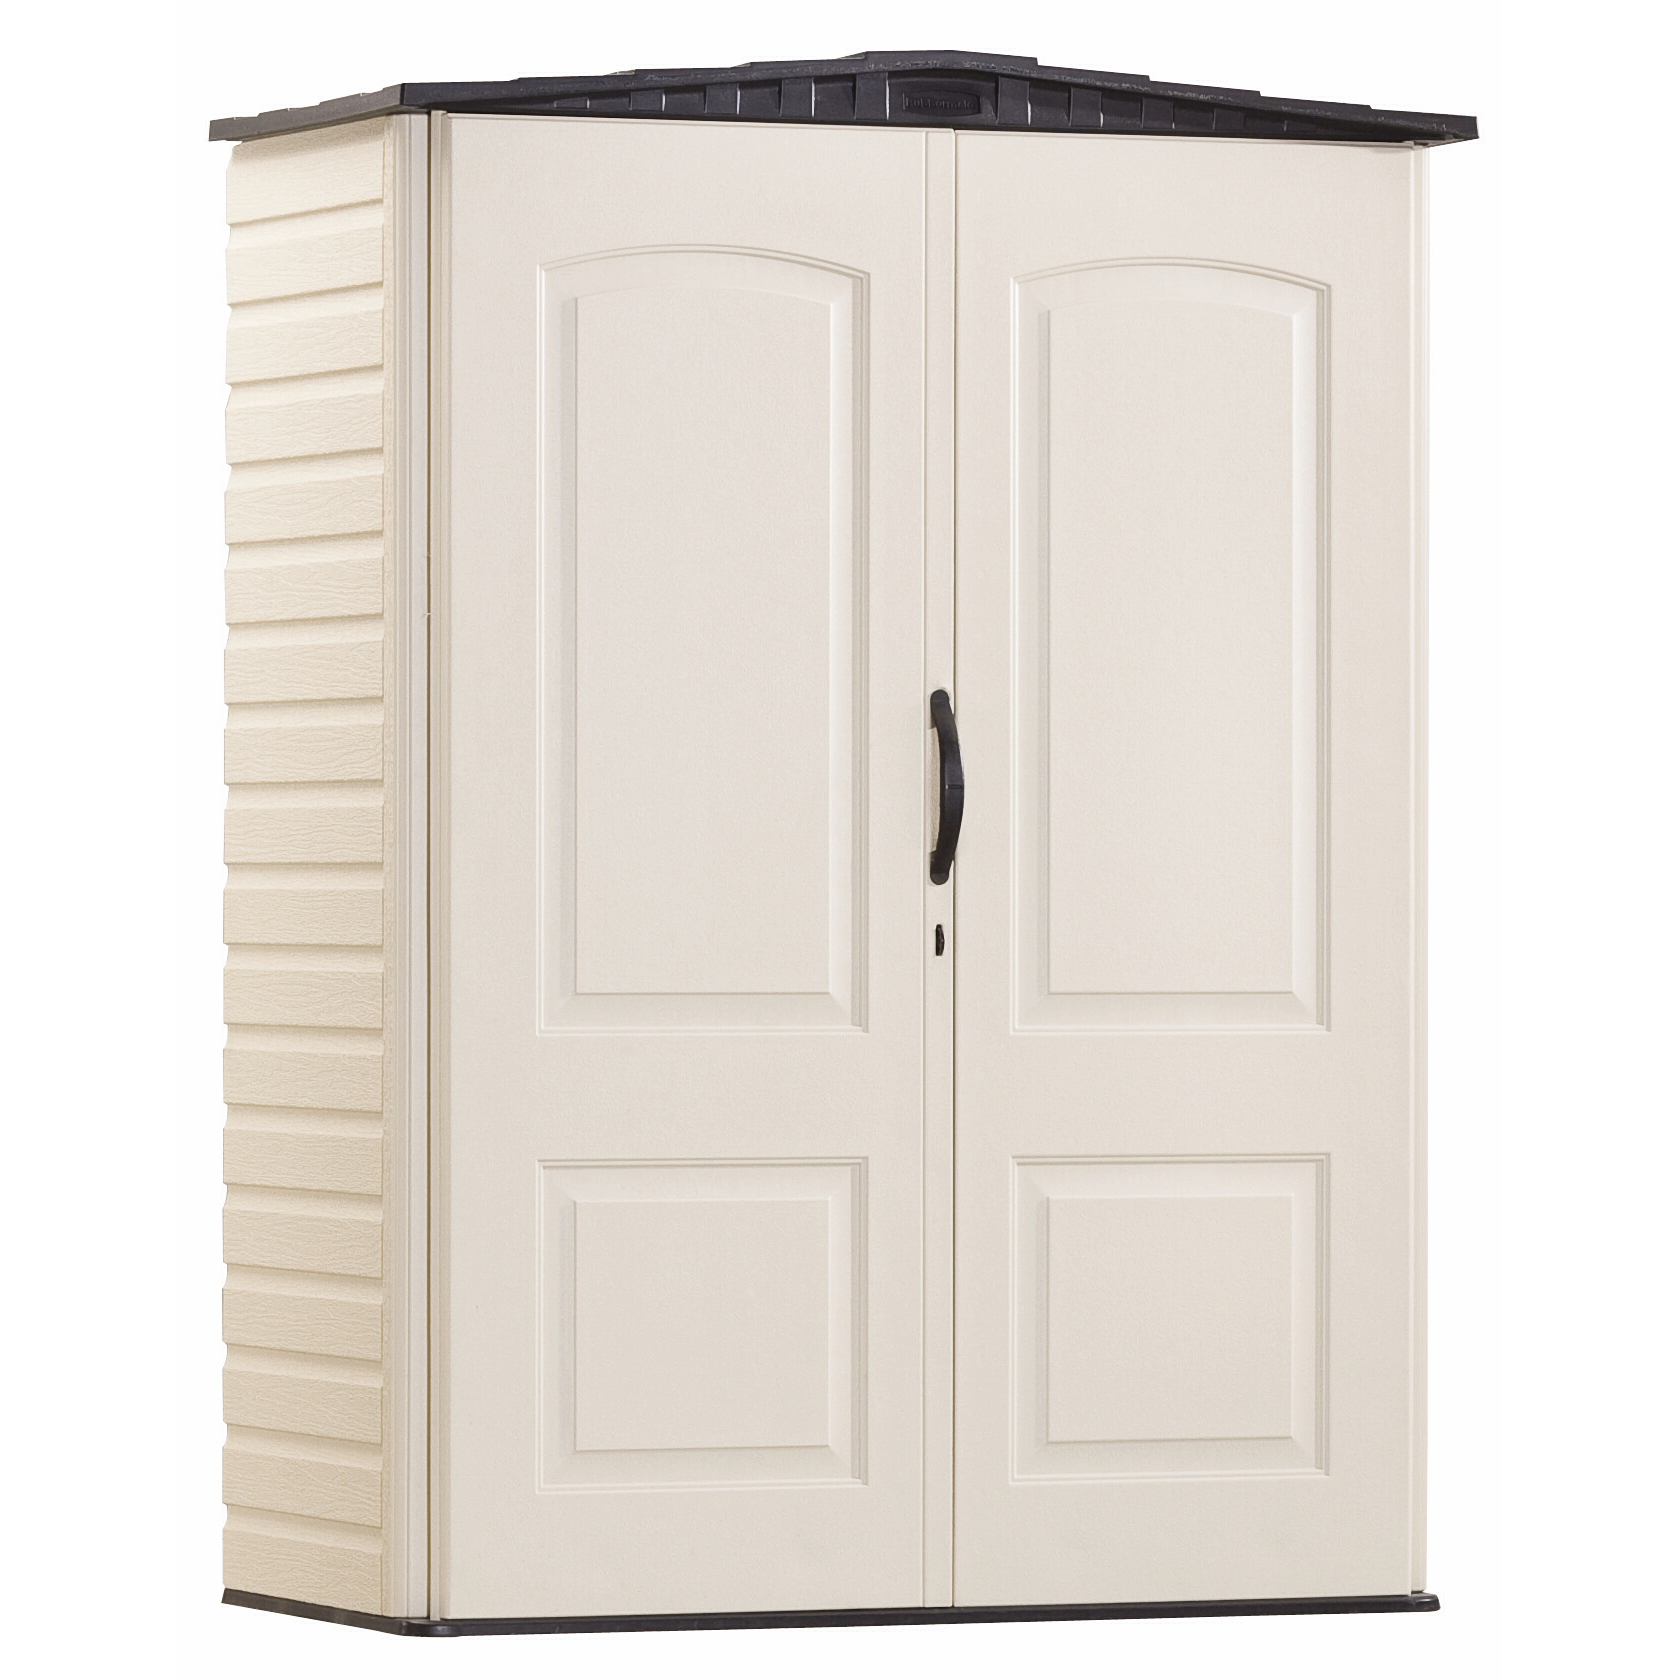 Rubbermaid 5 X 2 Ft Small Vertical Storage Shed Sandstone Onyx intended for dimensions 1680 X 1680